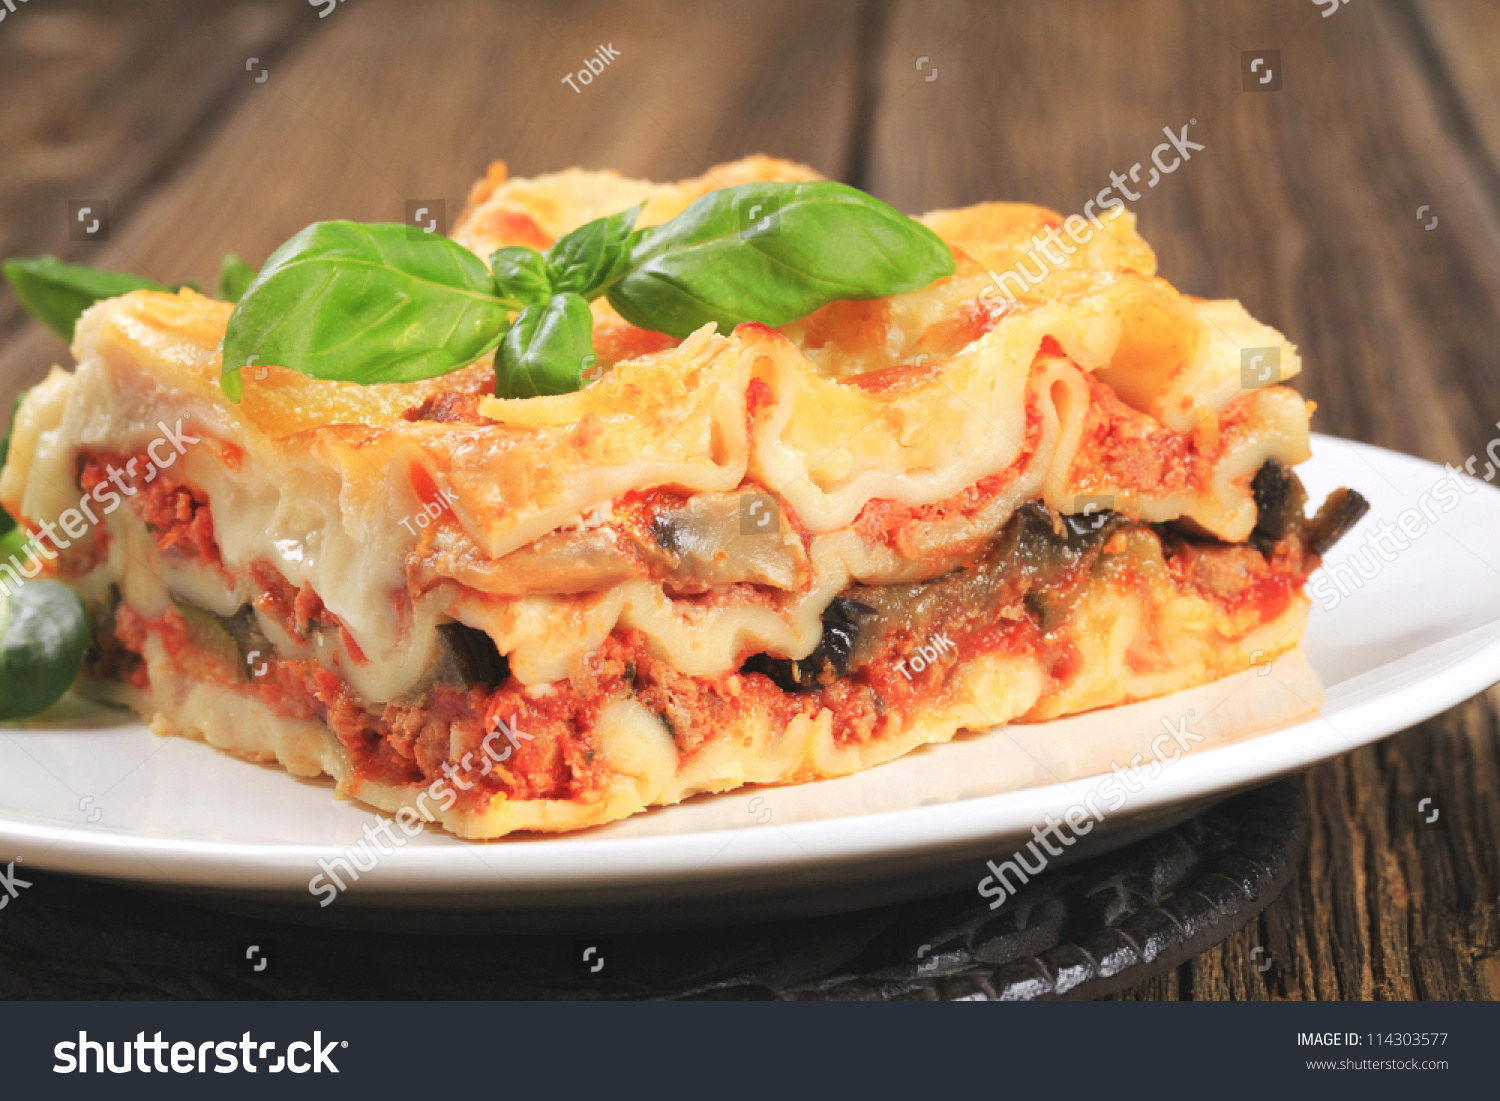 Portion Tasty Lasagna On Plate Stock Photo (Edit Now) 114303577 ...